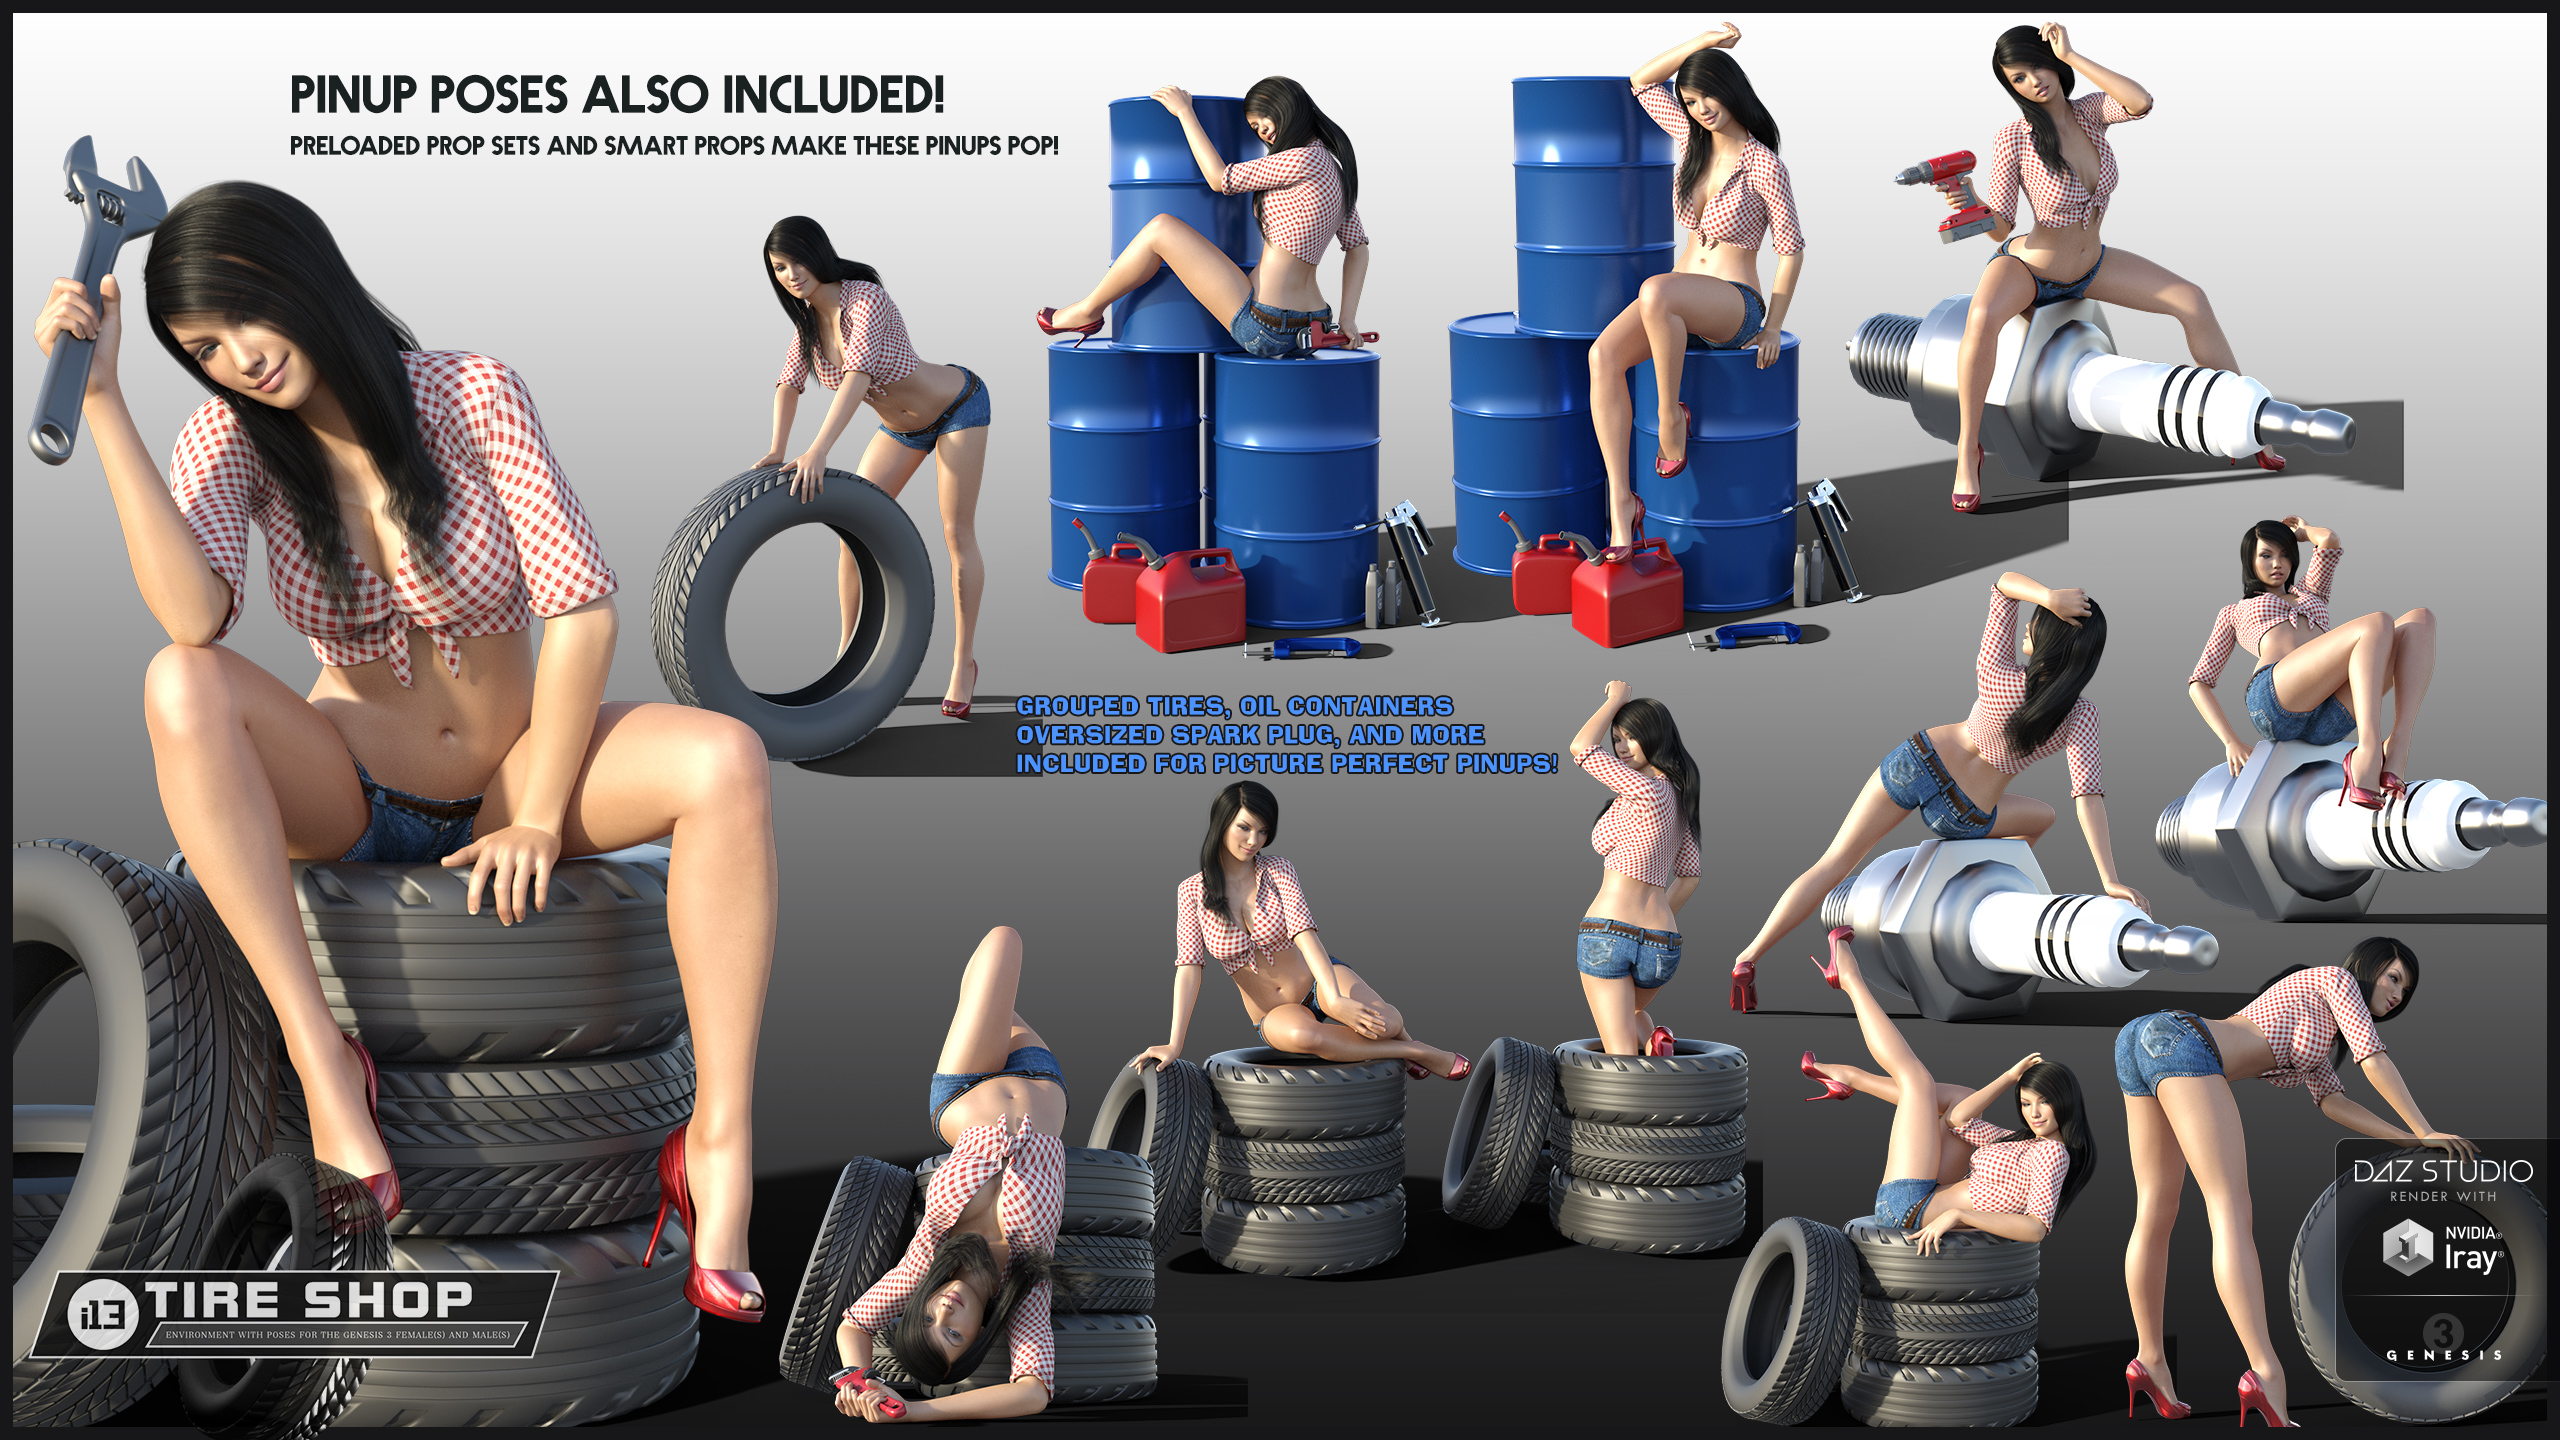 i13 Tire Shop Environment with Poses by: ironman13, 3D Models by Daz 3D